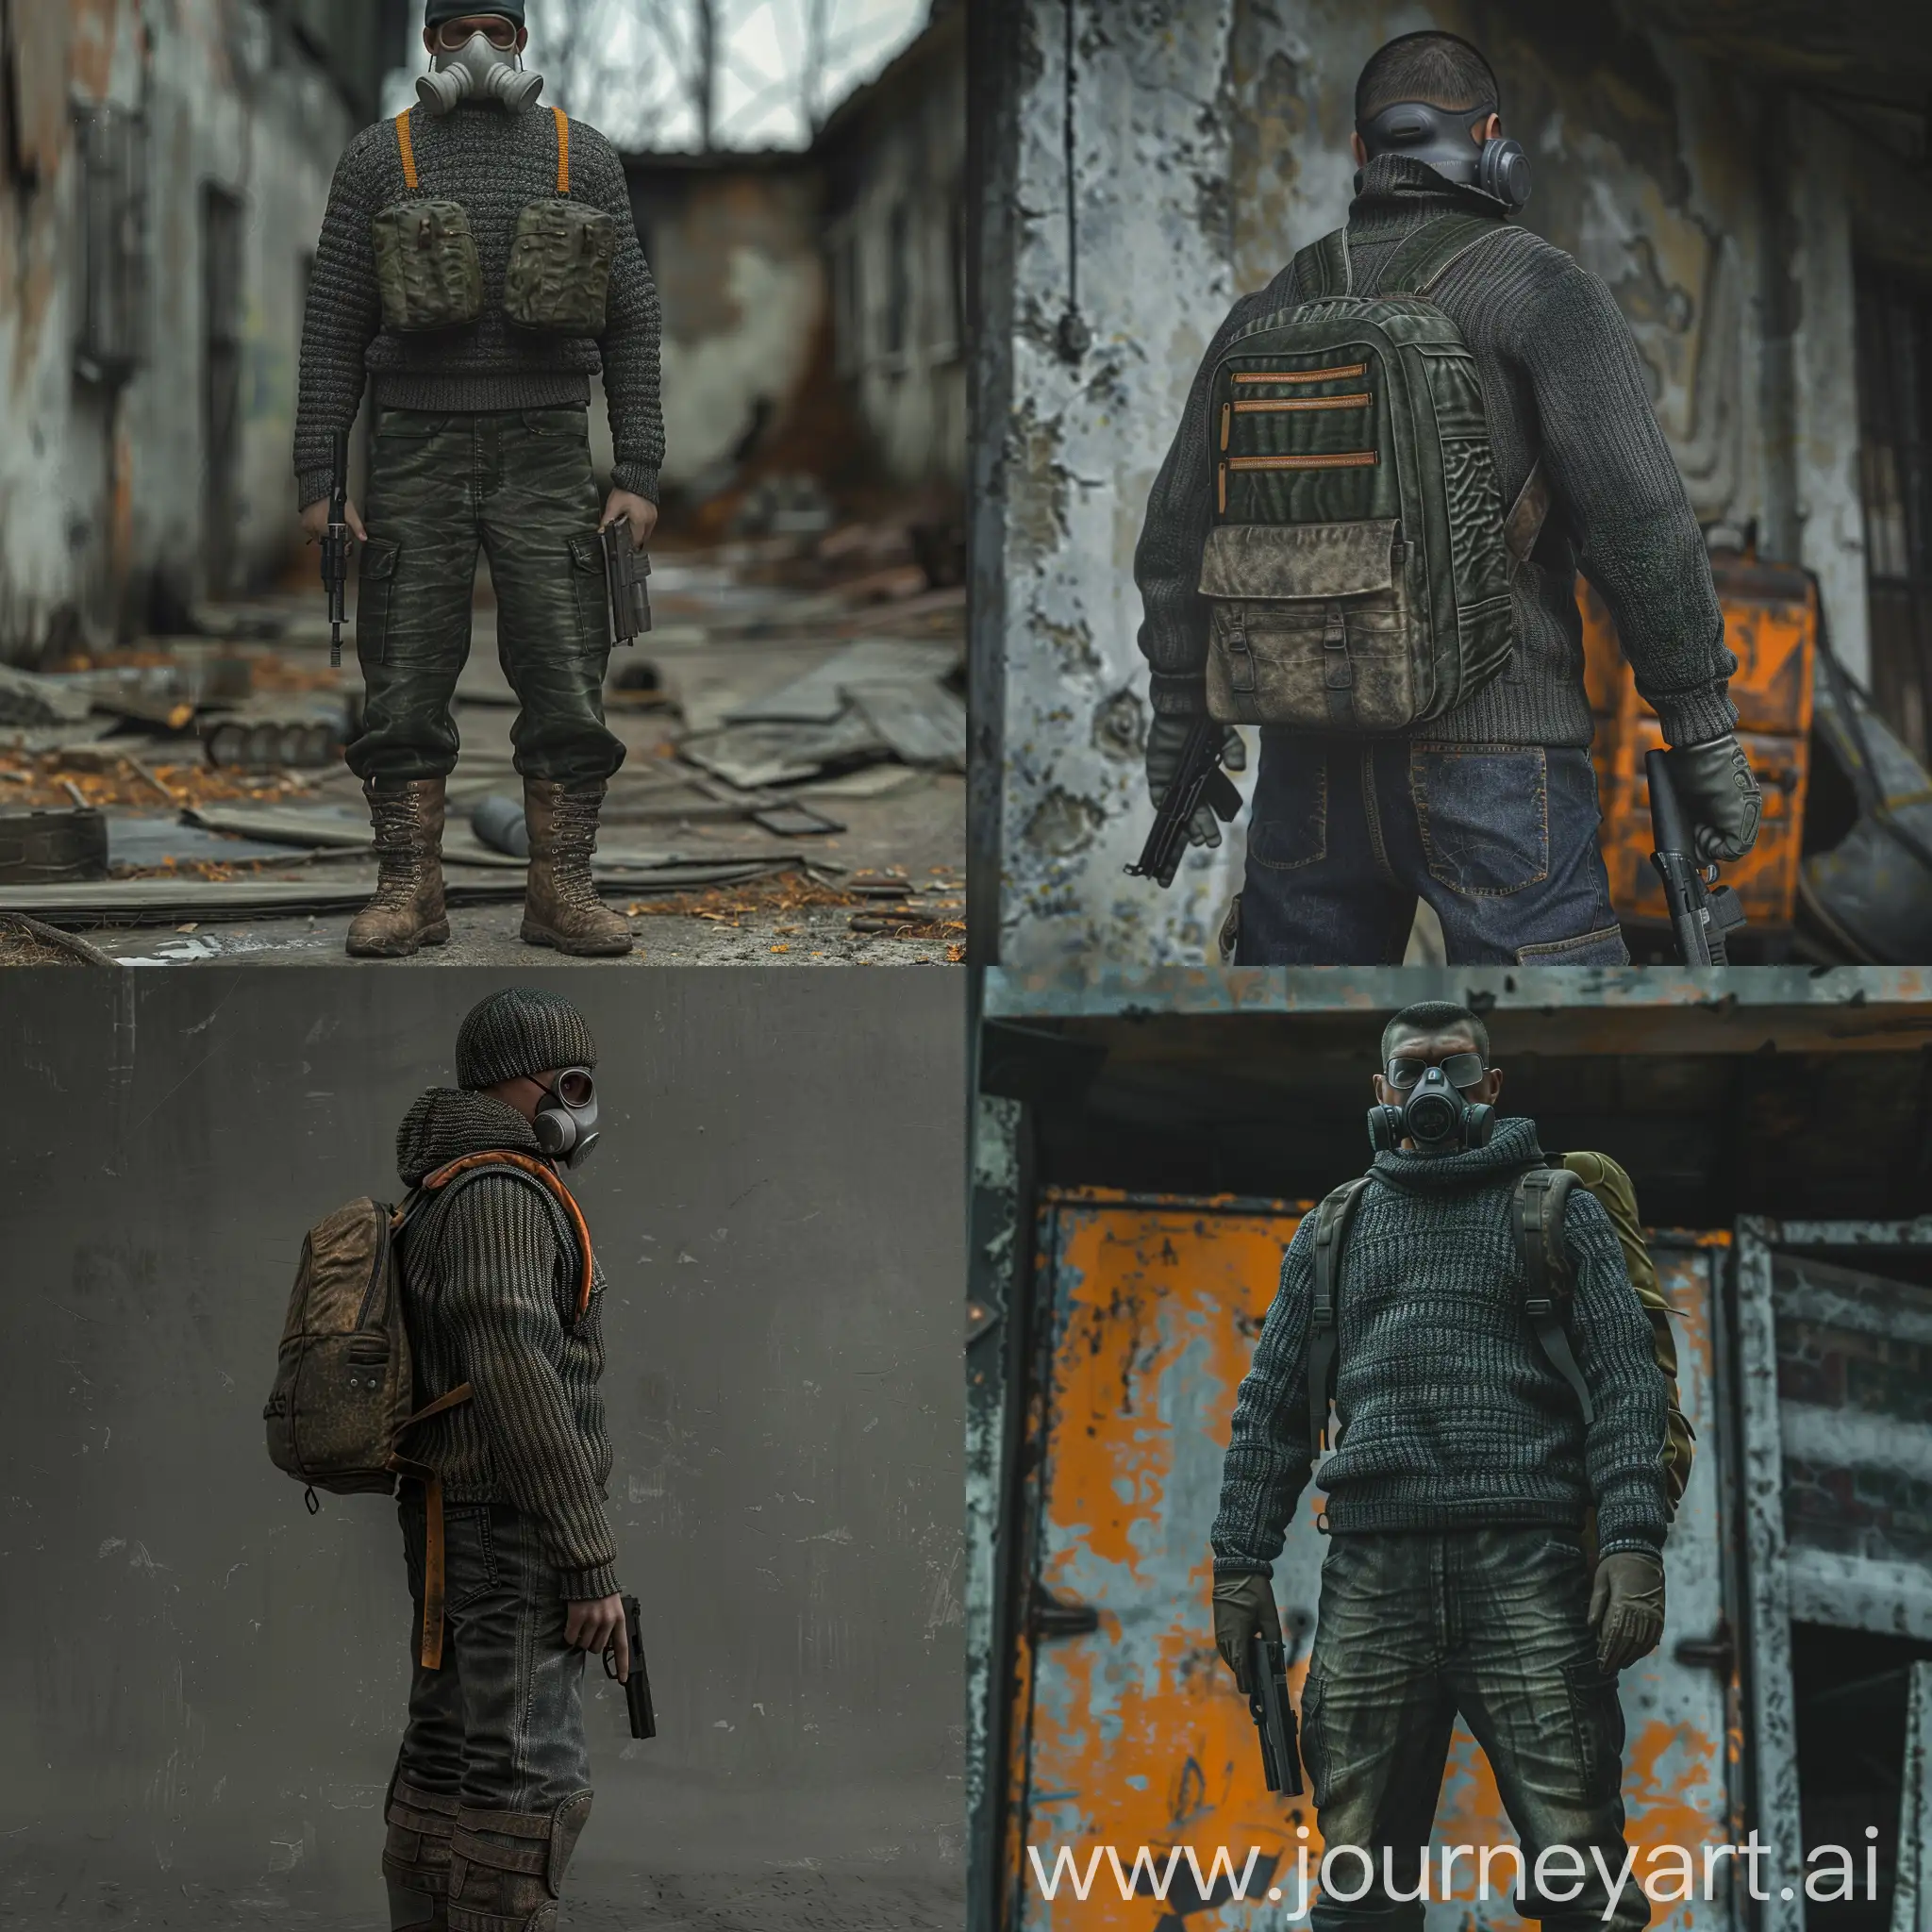 The stalker is a newcomer in the zone, a gas mask on his face, an old Soviet unloading on his body, old dirty jeans, an old dirty Soviet gray sweater is wearing on him, military boots on his feet, an old Soviet backpack on his back and a PM pistol on the hand.